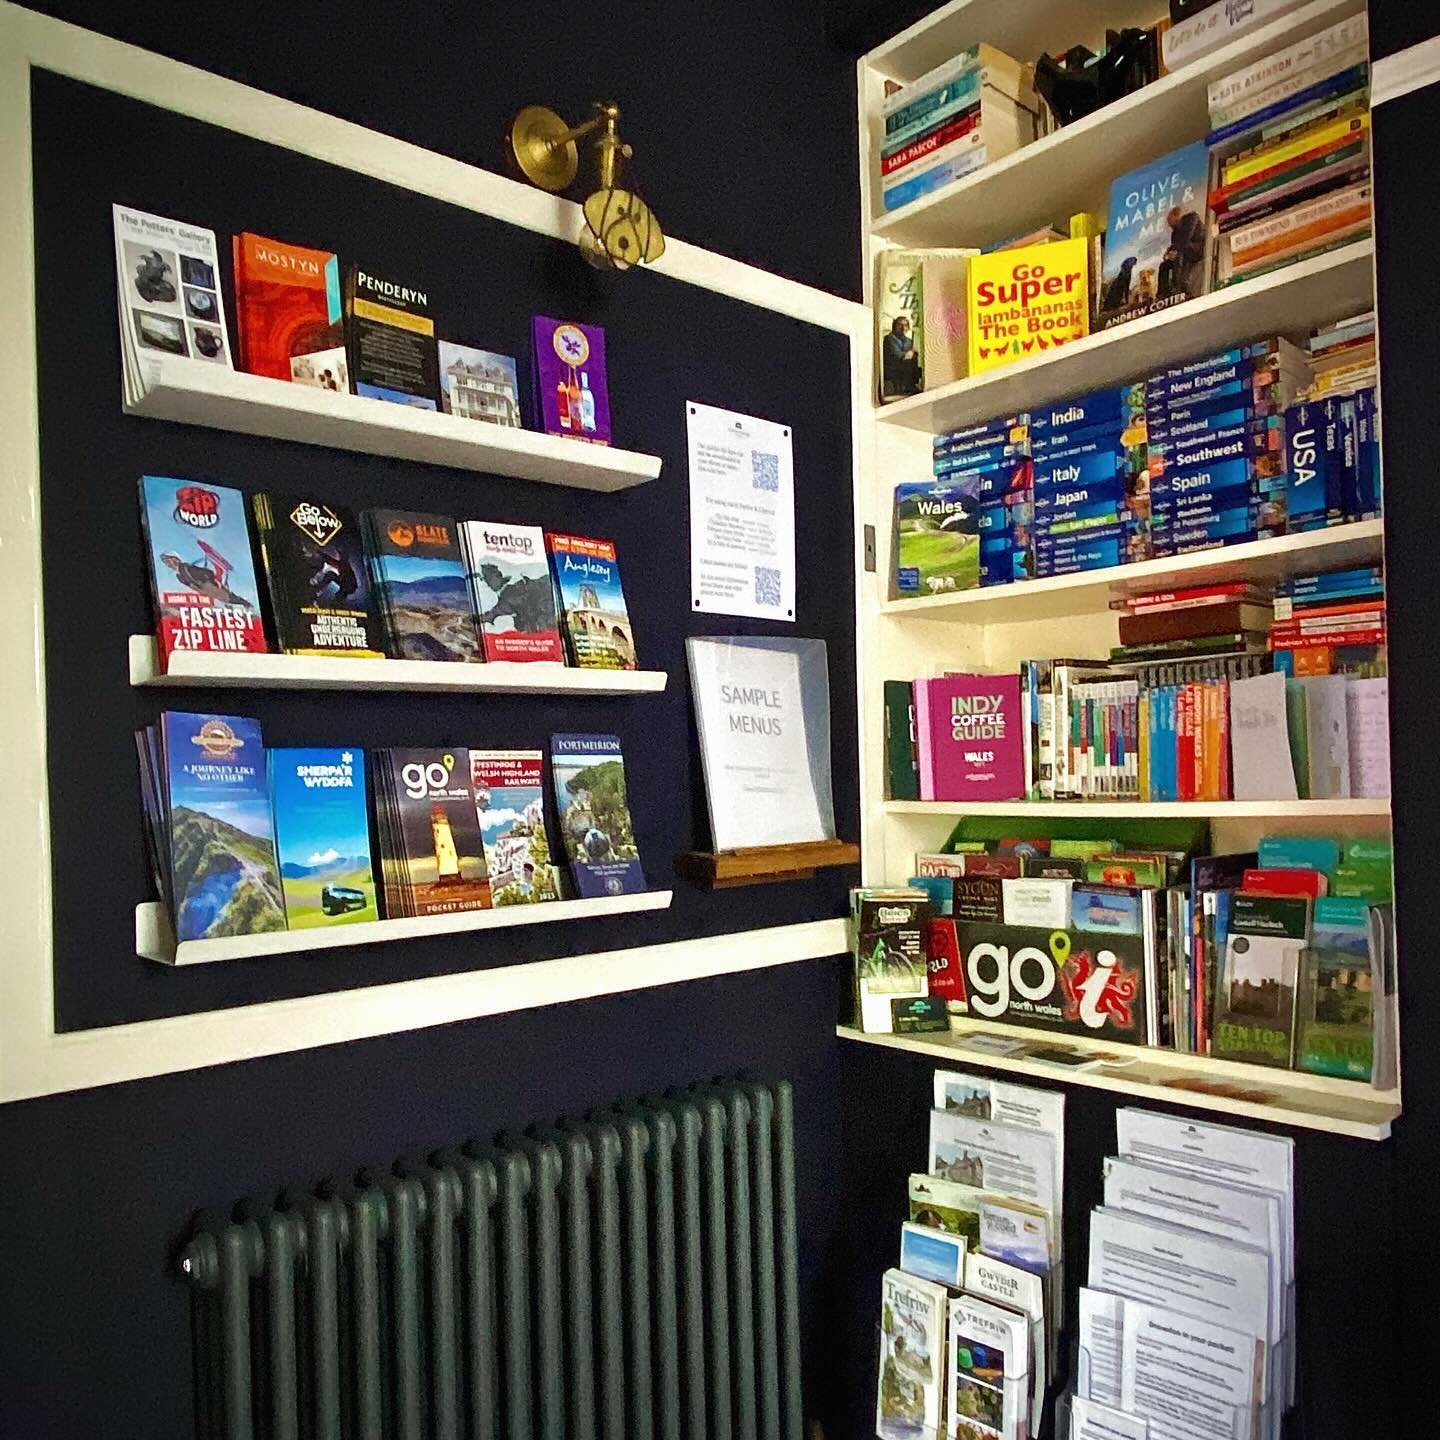 The new-and-improved-for-2024-guest-info-corner in our cosy snug is jam-packed with information that will help you maximise your stay in North Wales! 🏴󠁧󠁢󠁷󠁬󠁳󠁿 

Sample pub and restaurant menus, leaflets for the best attractions, suggested itine